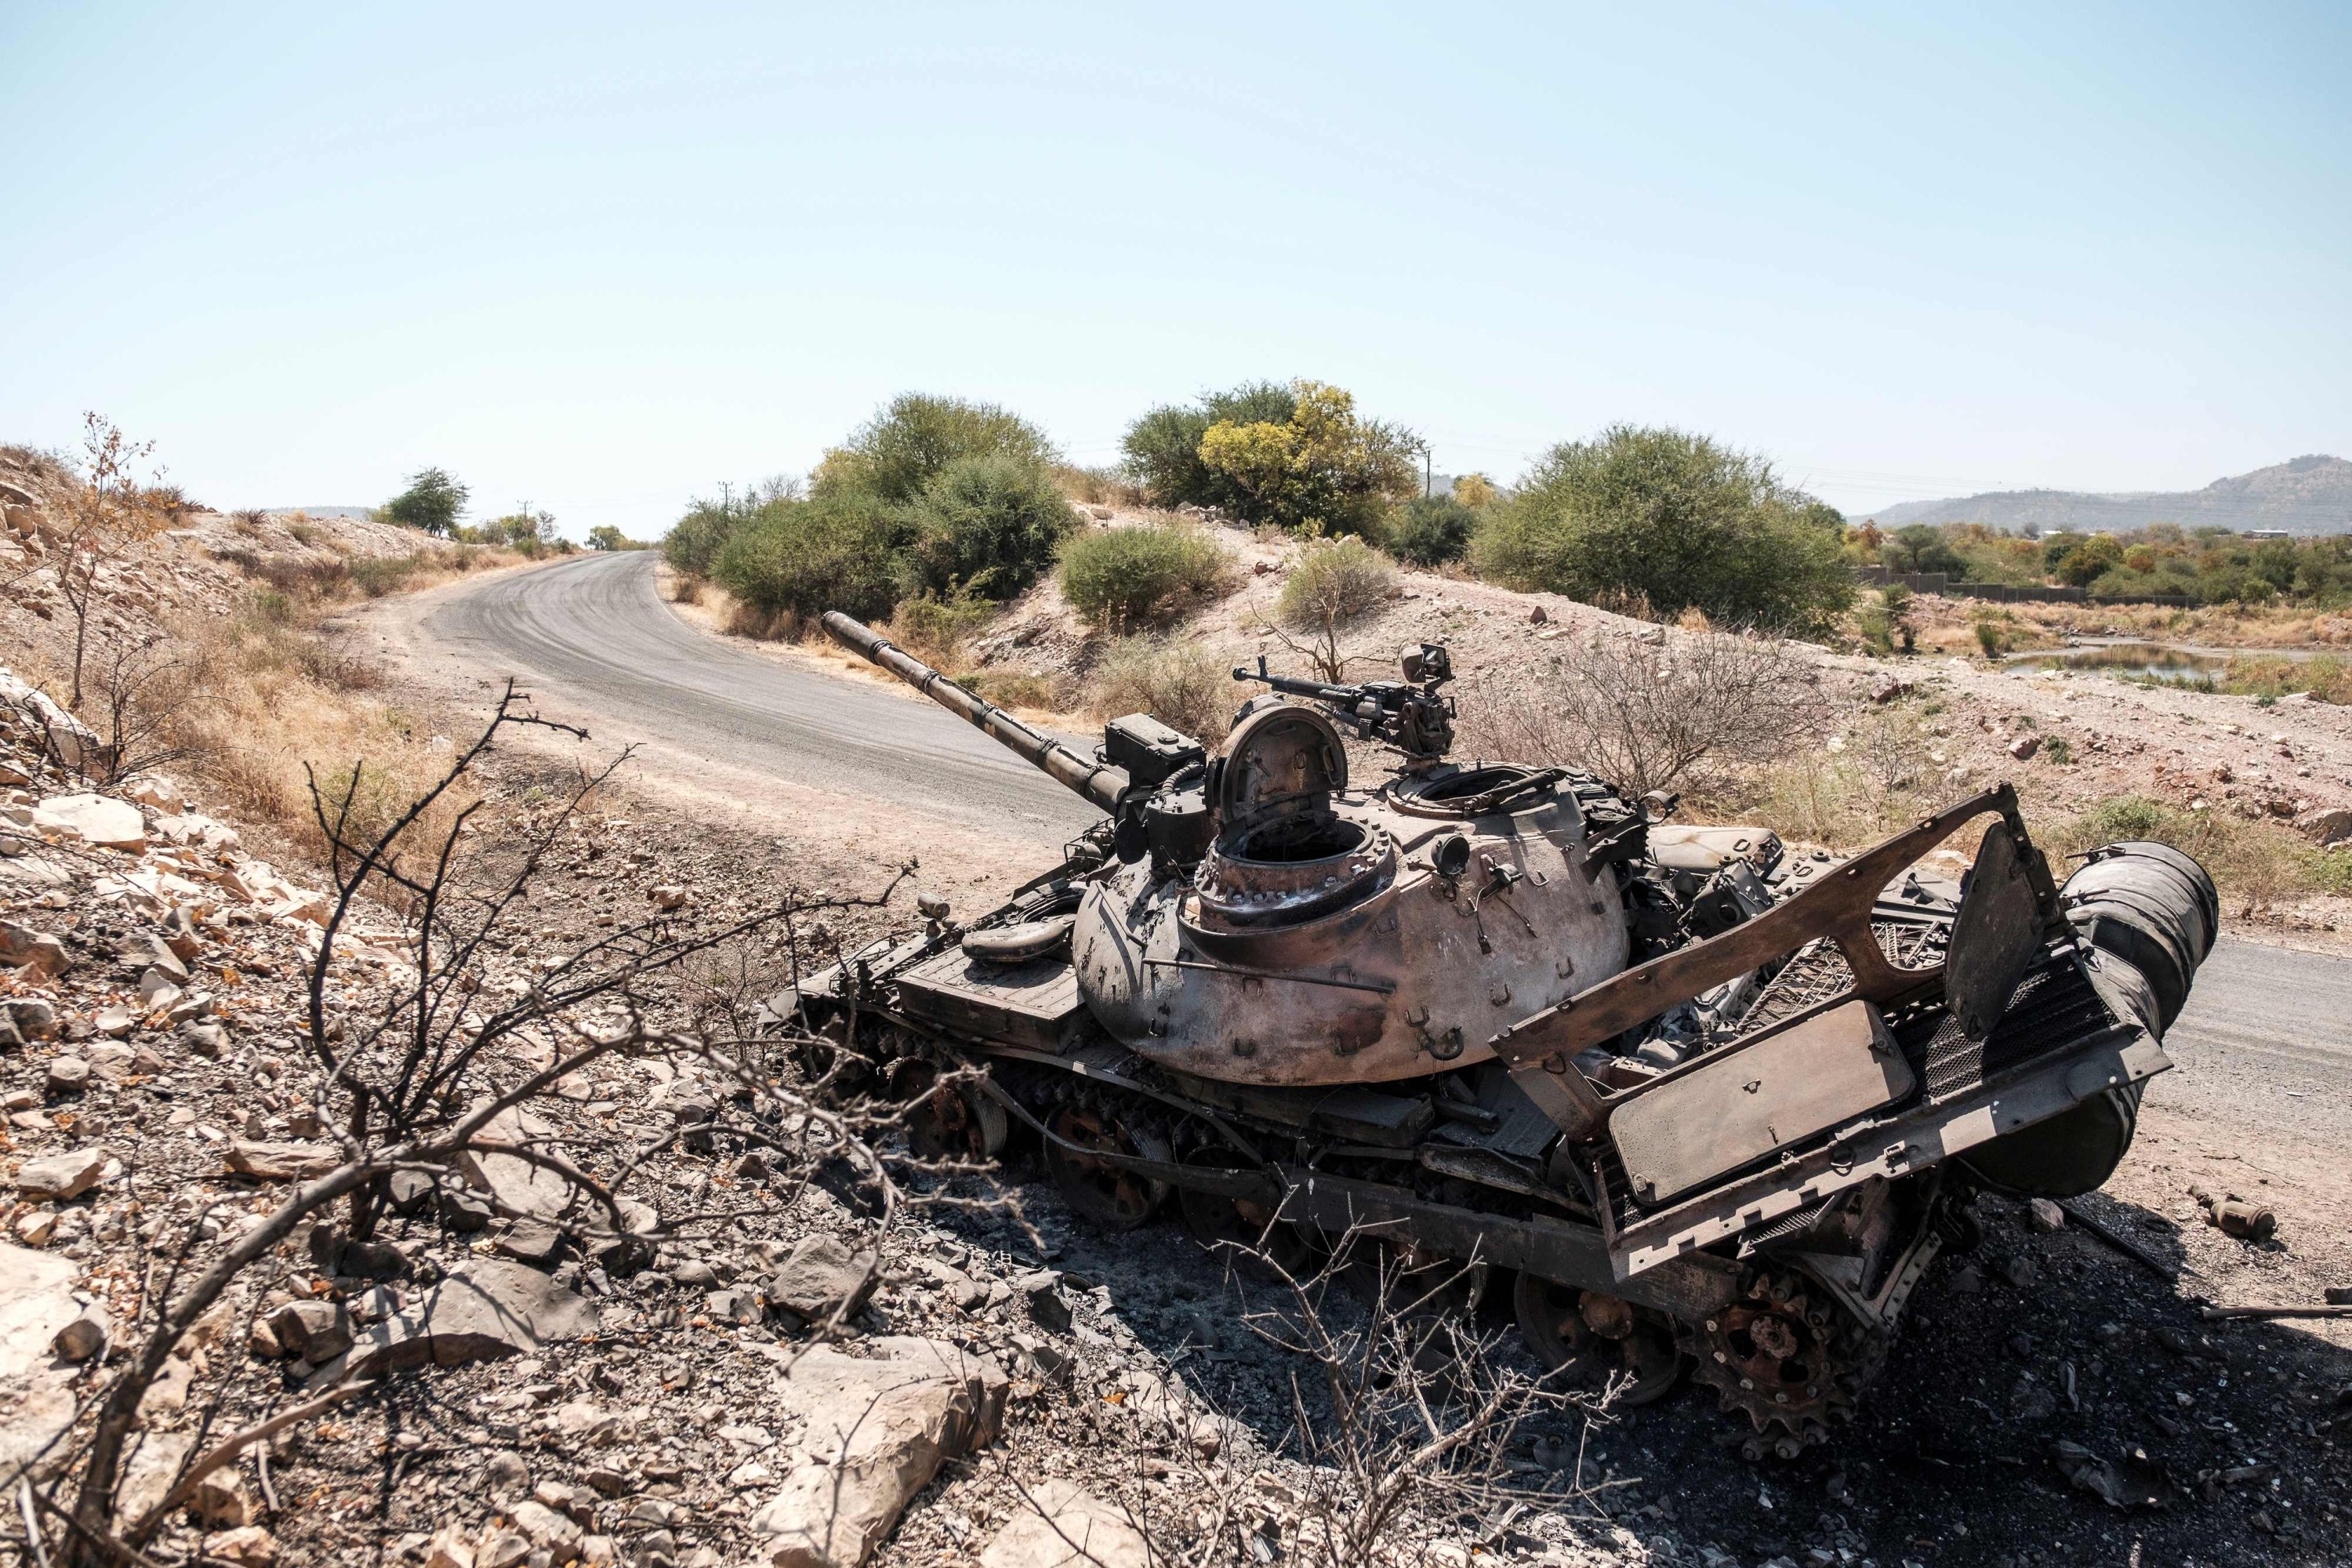 A damaged tank stands abandoned on a road near Humera, Ethiopia, Nov. 22, 2020. (AFP Photo)